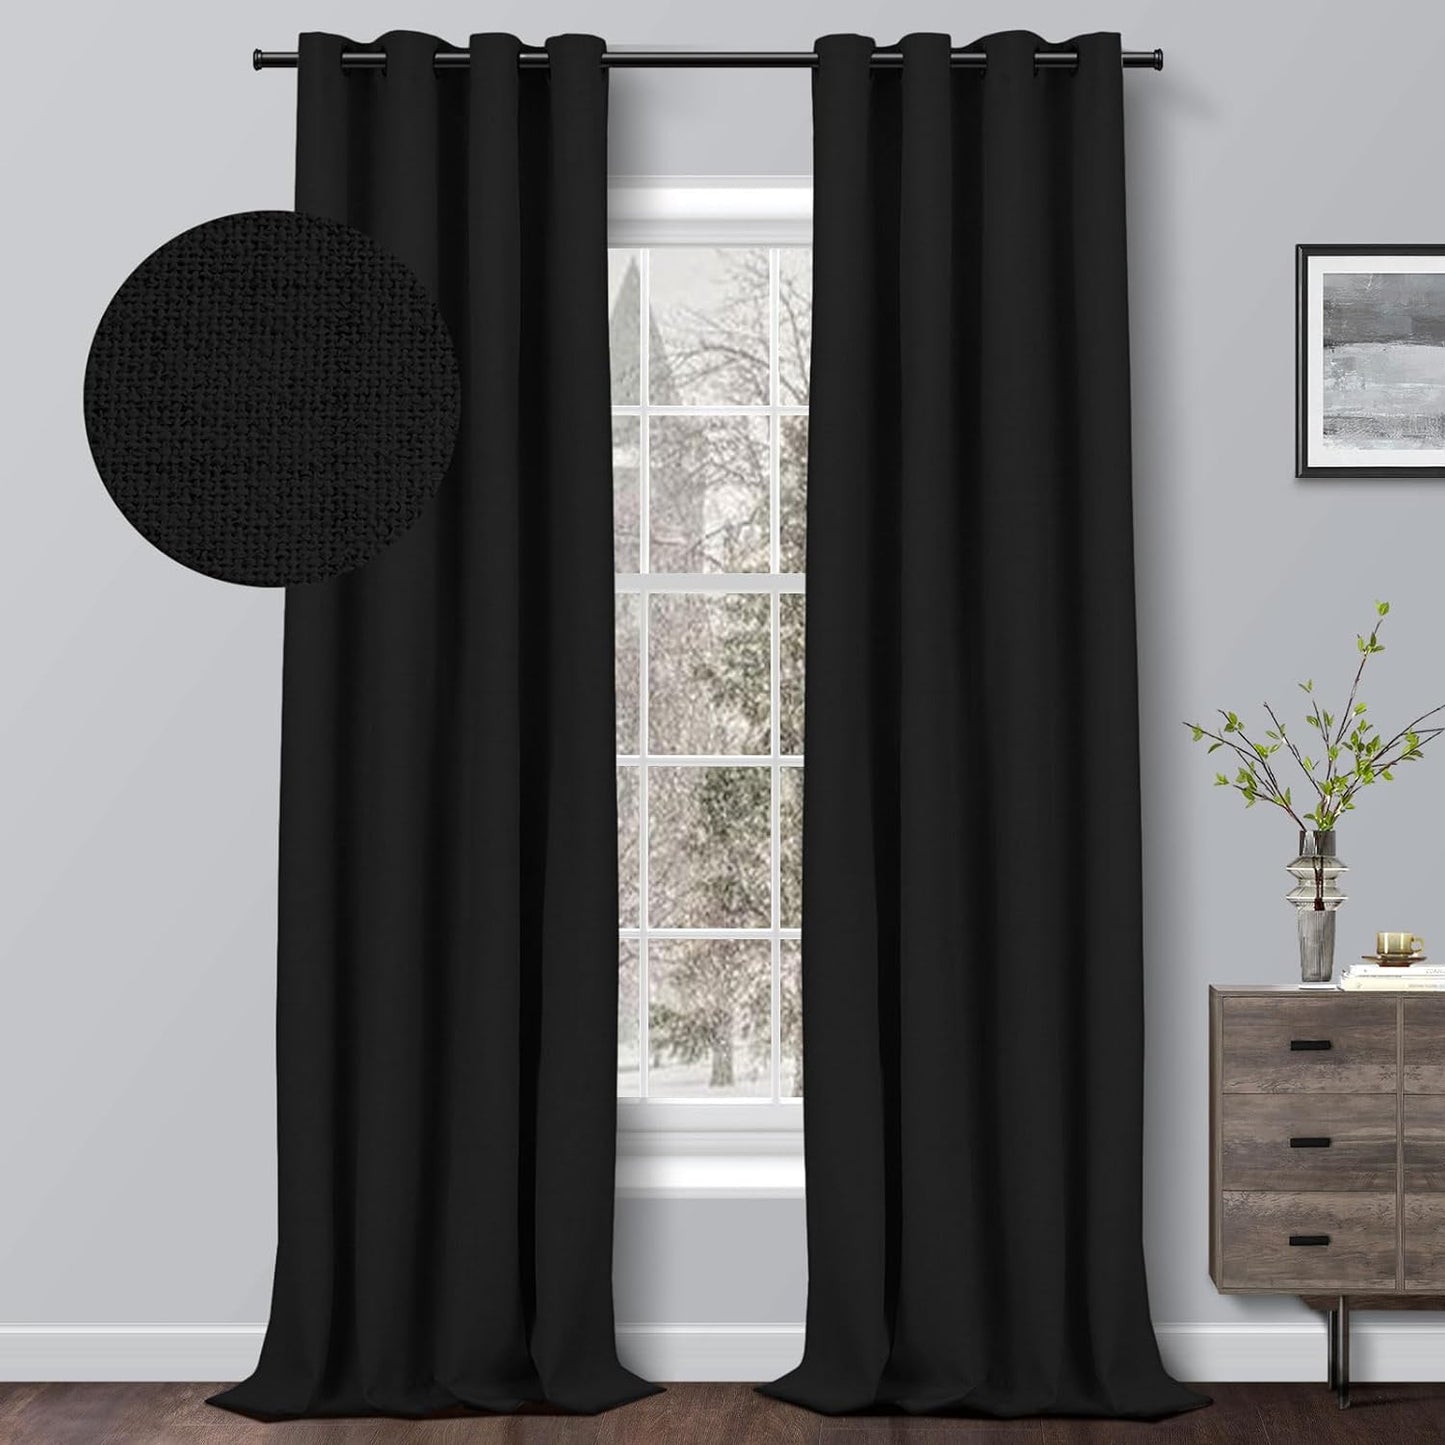 RHF Blackout Curtains 84 Inch Length 2 Panels Set, Primitive Linen Look, 100% Blackout Curtains Linen Black Out Curtains for Bedroom Windows, Burlap Grommet Curtains-(50X84, Oatmeal)  Rose Home Fashion Black W50 X L96 